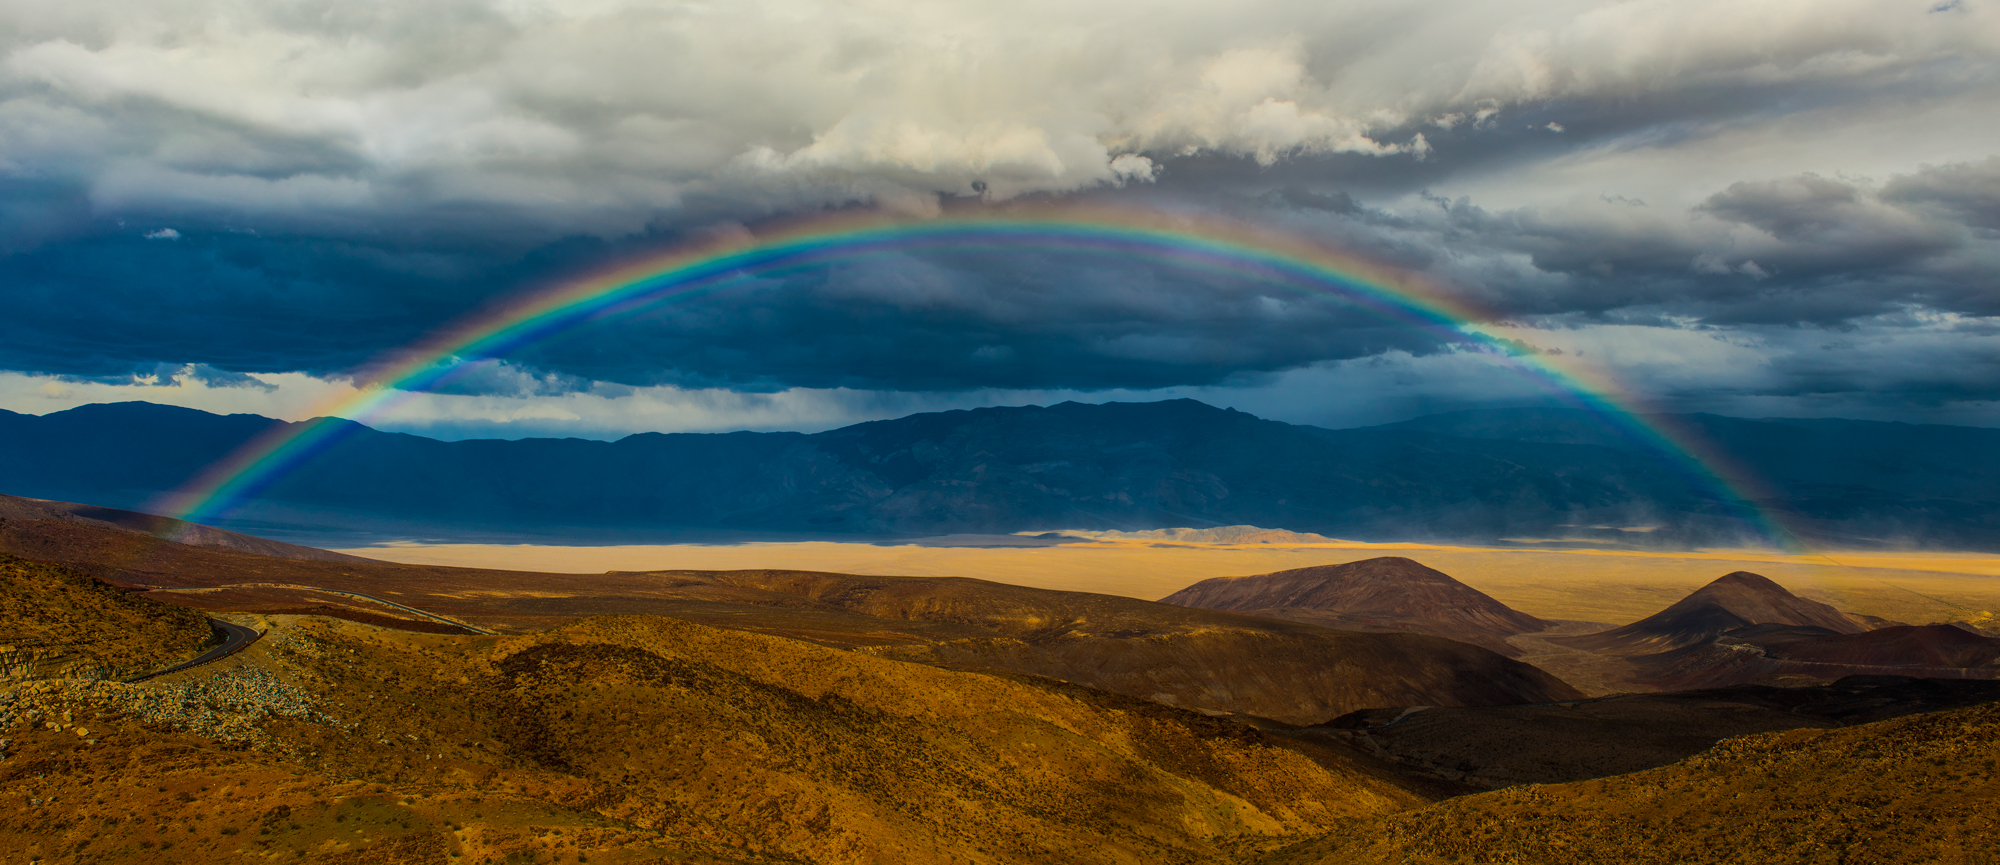 Death Valley National Park Panamint Valley Rainbow California Panorama Fine Art Landscape Photography Mark Lilly